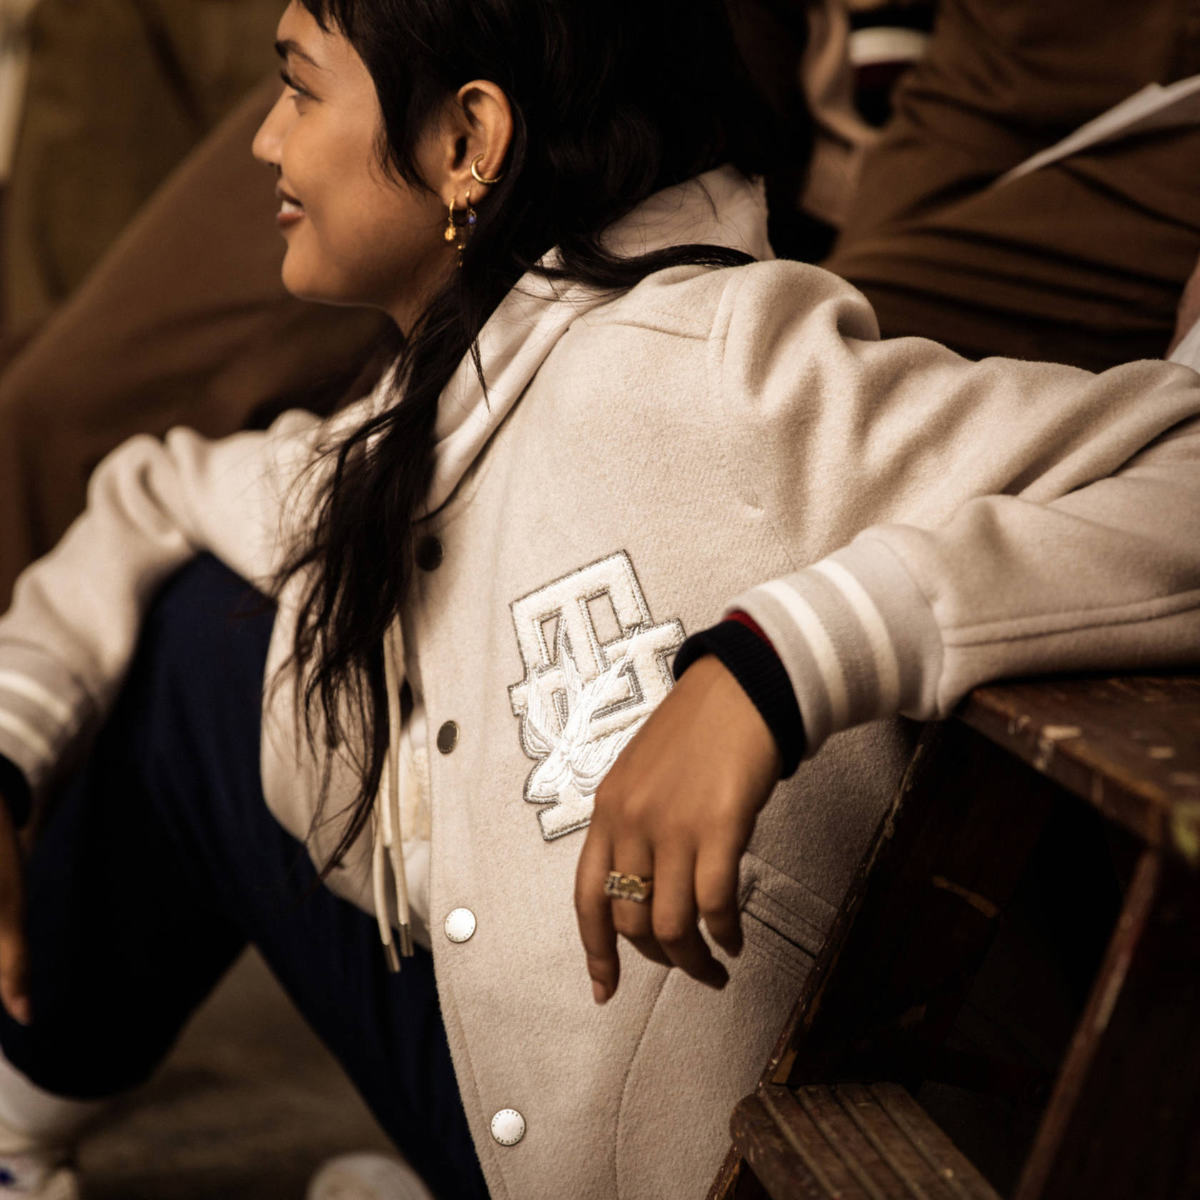 Tommy Hilfiger Presents Its New Capsule Collection And Campaign: Tommy X Shawn Classics Reborn